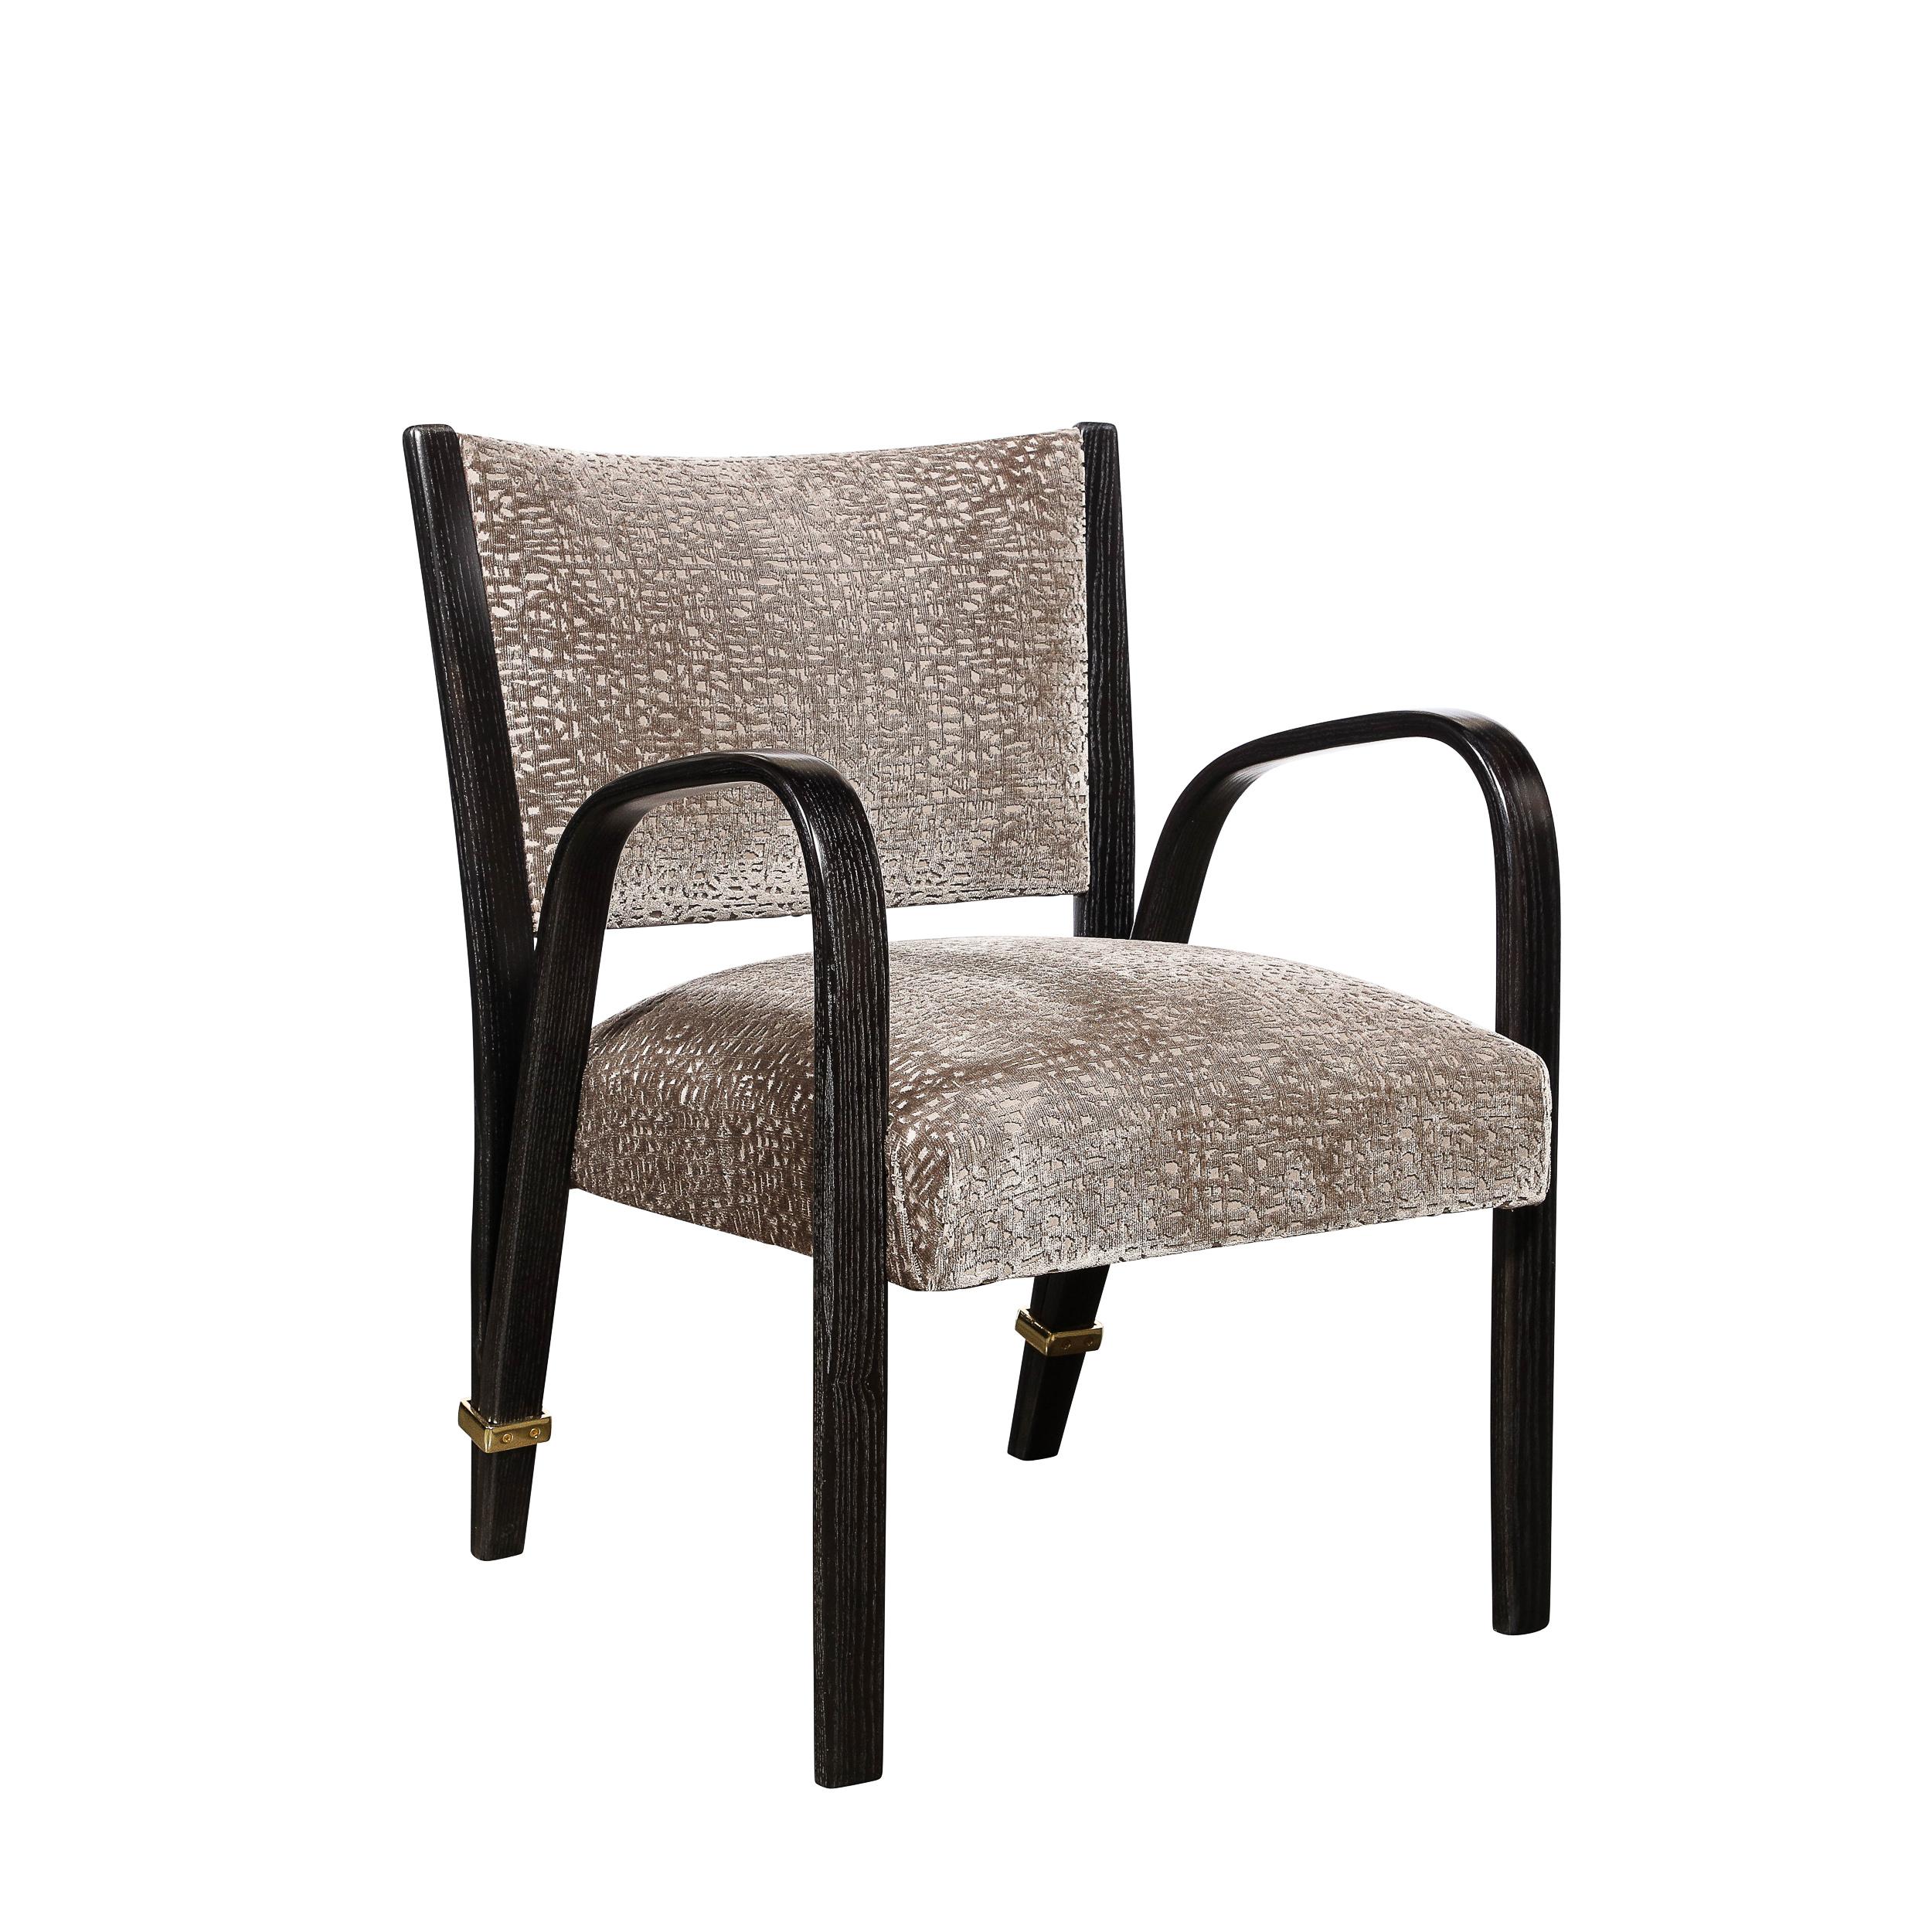 This stunning pair of Mid-Century Modern spring back chairs were realized by the esteemed designer Hughes Steiner in France circa 1950. They offer a graphic form with a dramatically arched arm rests that descend into straight front legs. The bent